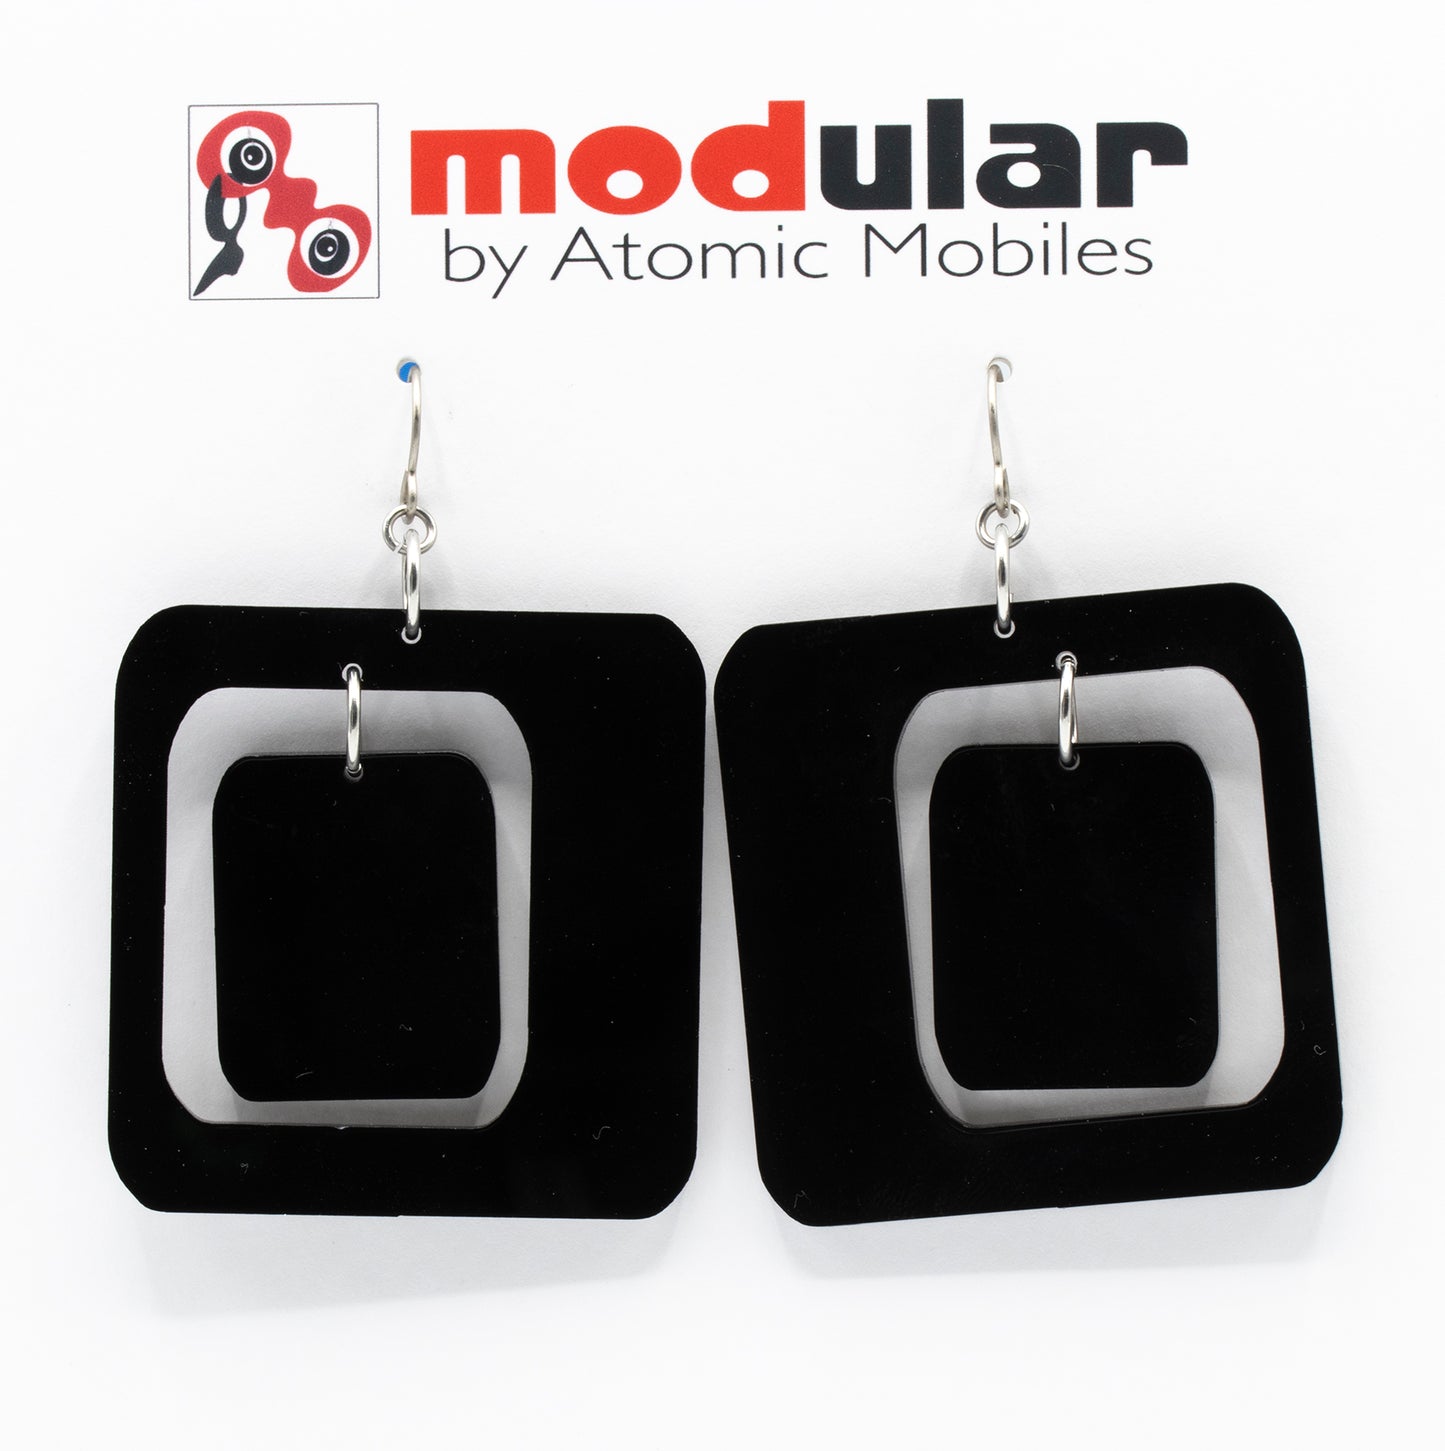 MODular Earrings - Coolsville Statement Earrings in Black by AtomicMobiles.com - retro era inspired mod handmade jewelry